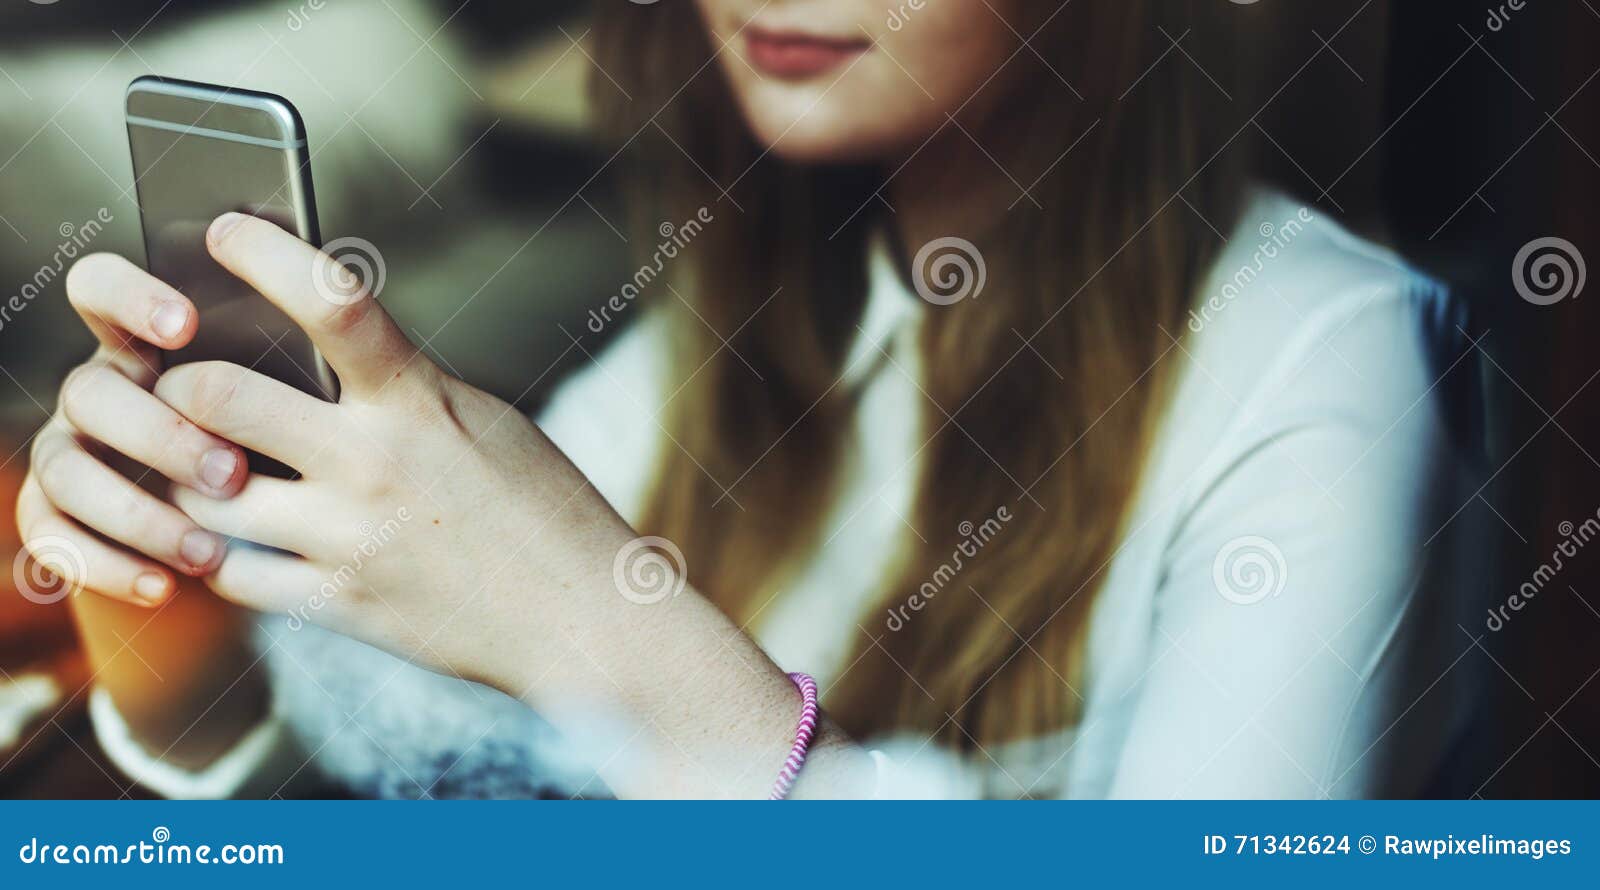 social media browsing pretty girl youth culture concept